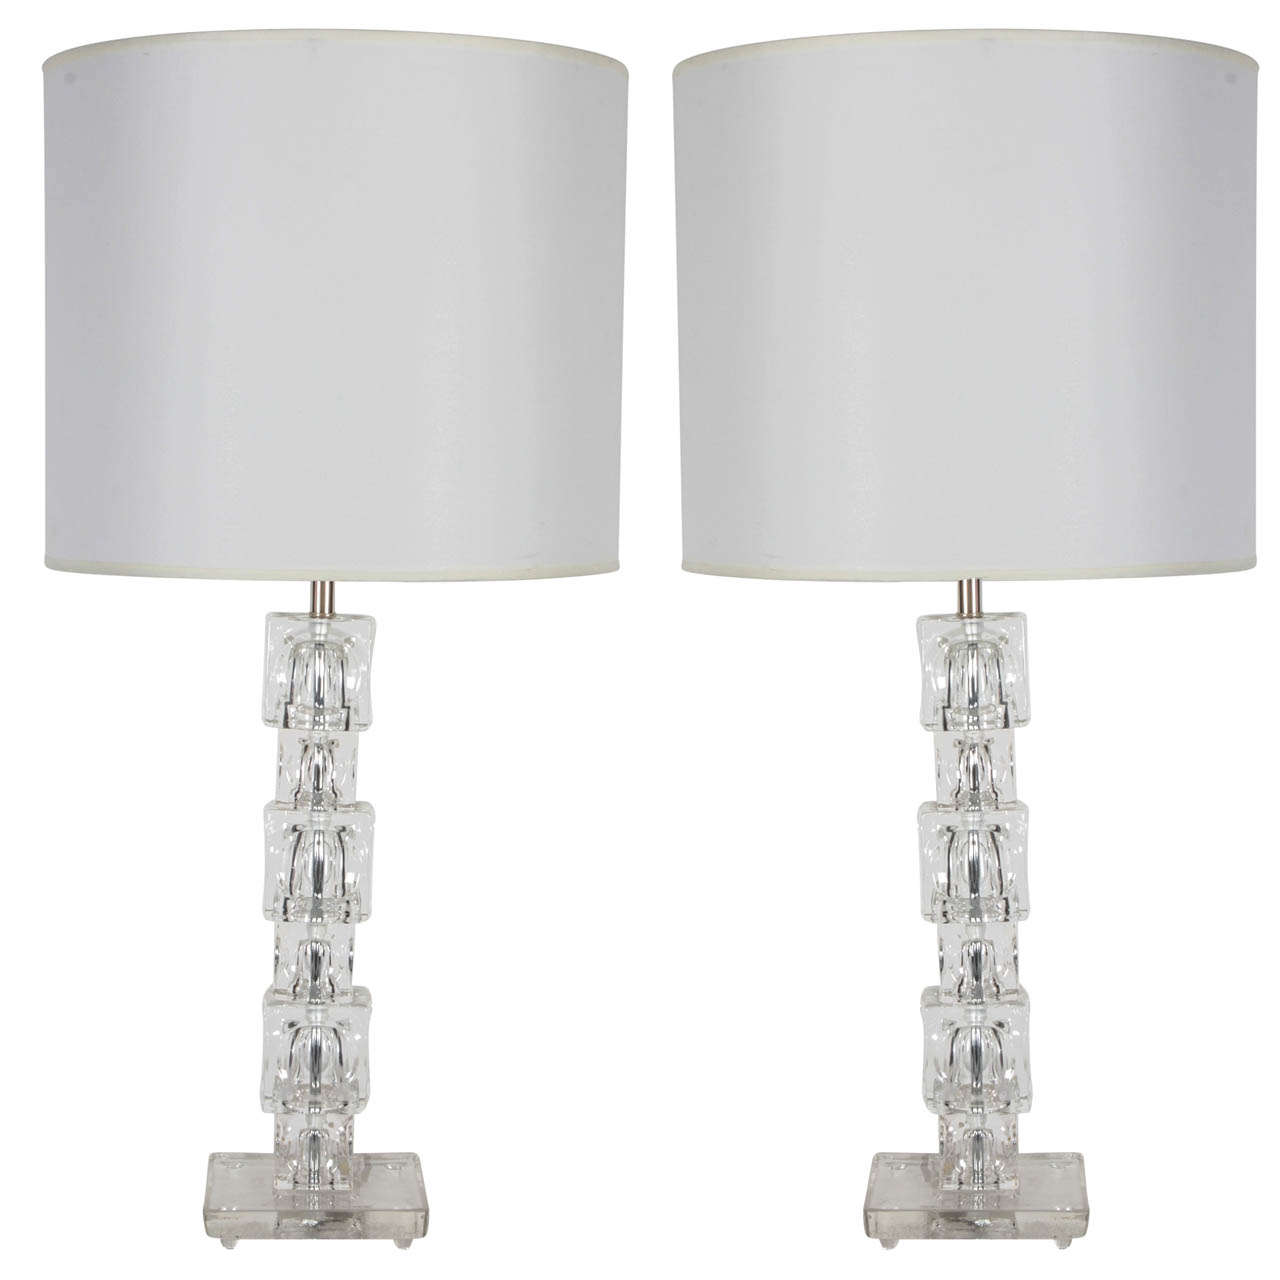 Pair of Stacked Crystal Block Lamps by Orrefors